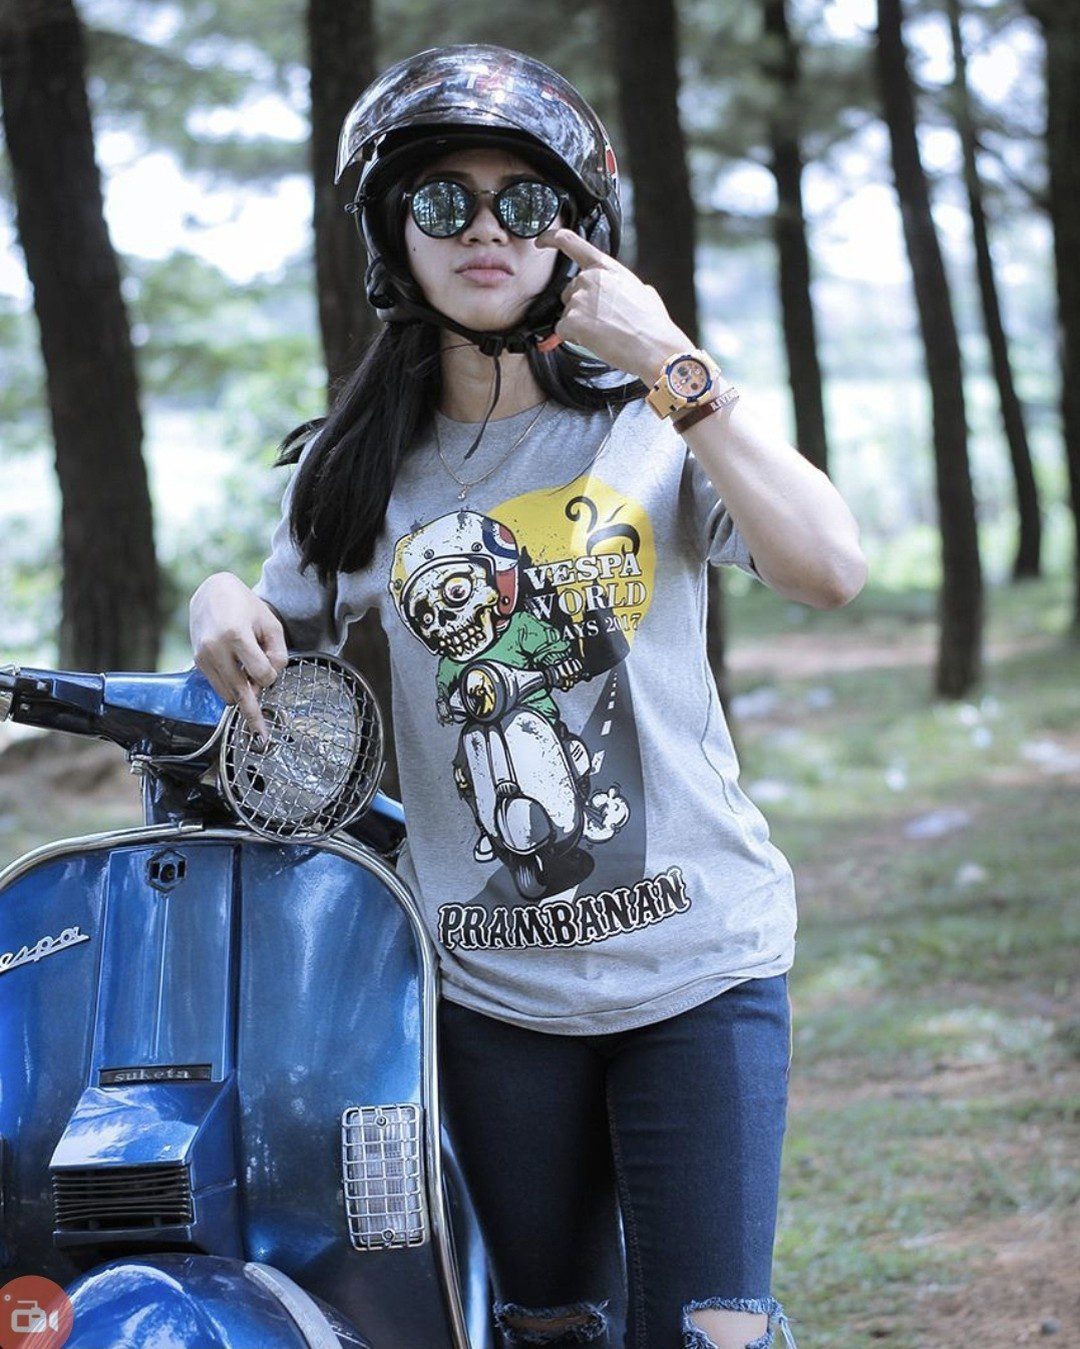 Vespa girl on yellow Vespa PX classic

Hashtag and mention @vespapxnet for feature repost
Check website www.vespapx.net for more 

@dnrmaharani